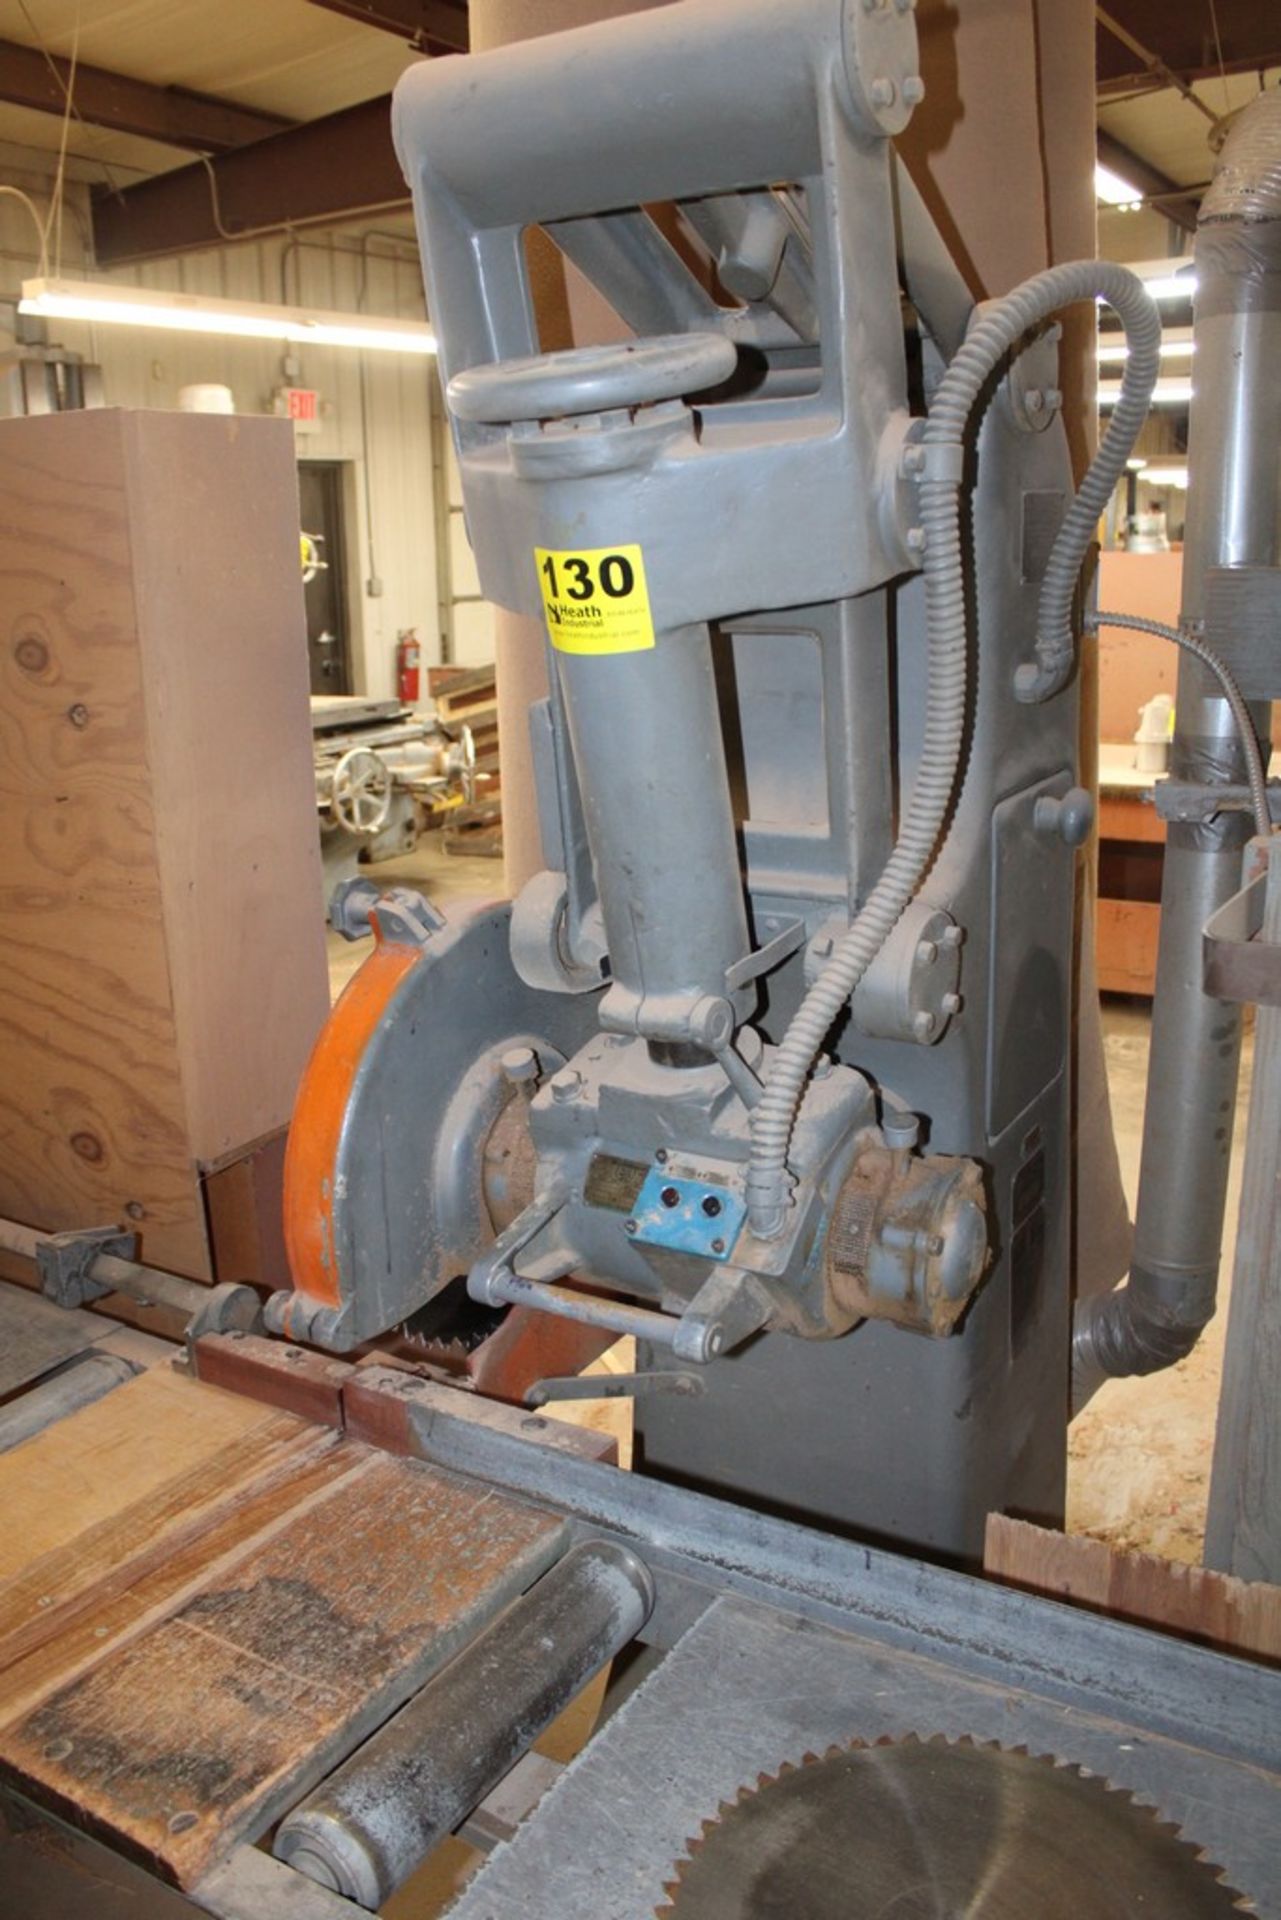 YATES AMERICAN 16" BLADE SWING SAW, S/N B-5923, 5 HP DRIVE, WITH ROLLER TABLE, WITH EXTRA 14" BLADE - Image 5 of 7